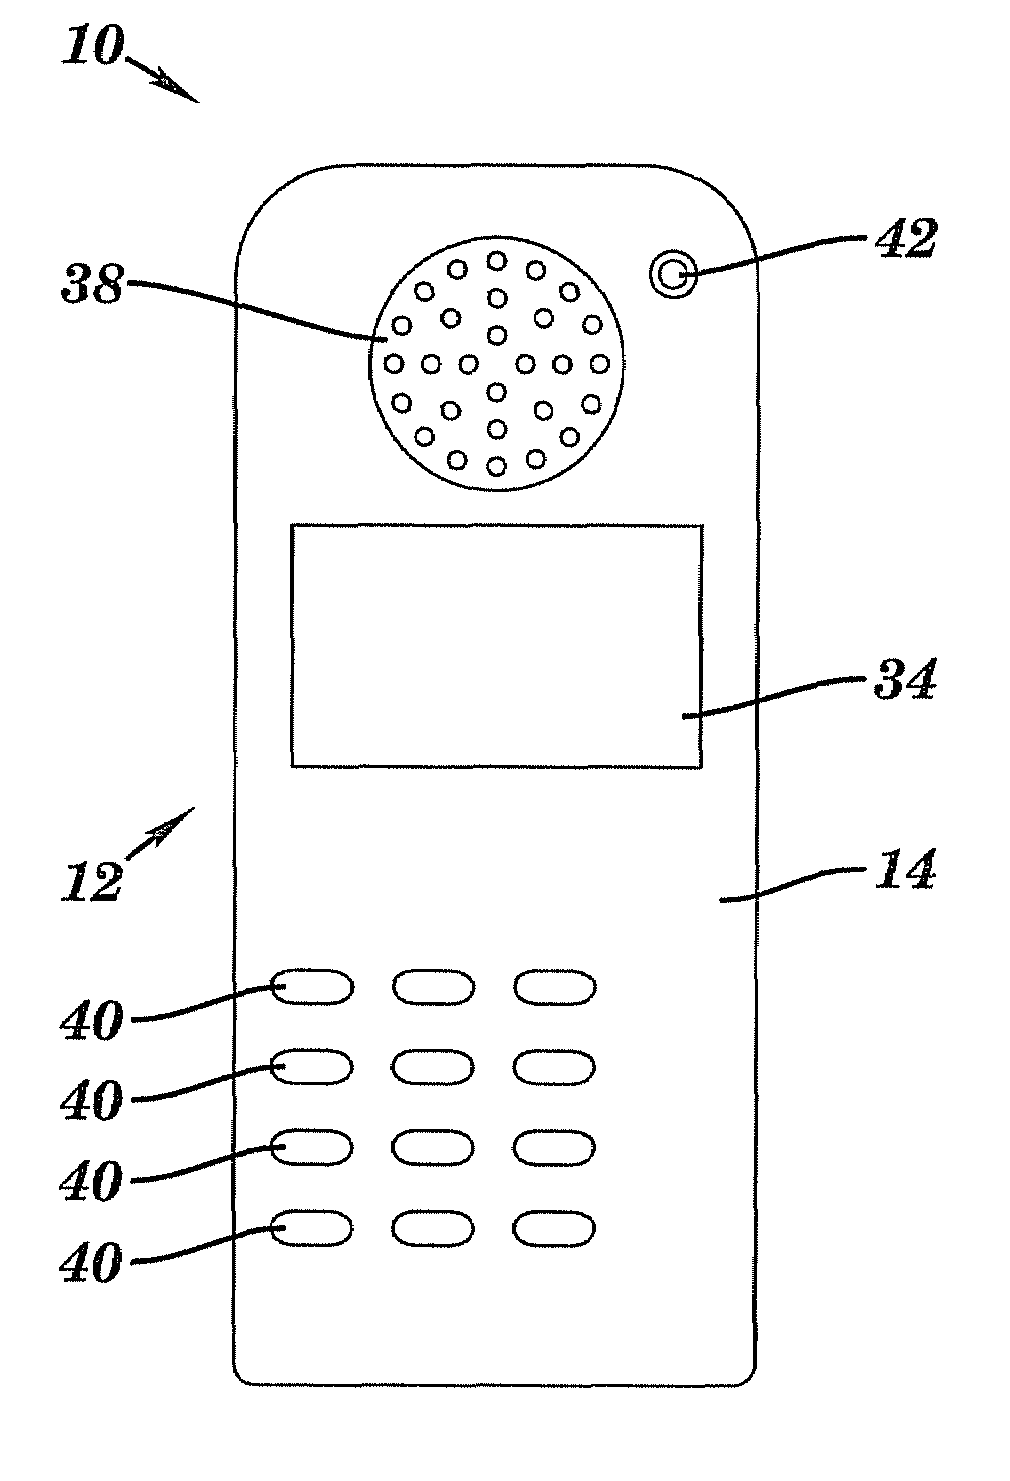 Cellphone usage and mode detection and automatic speakerphone toggle